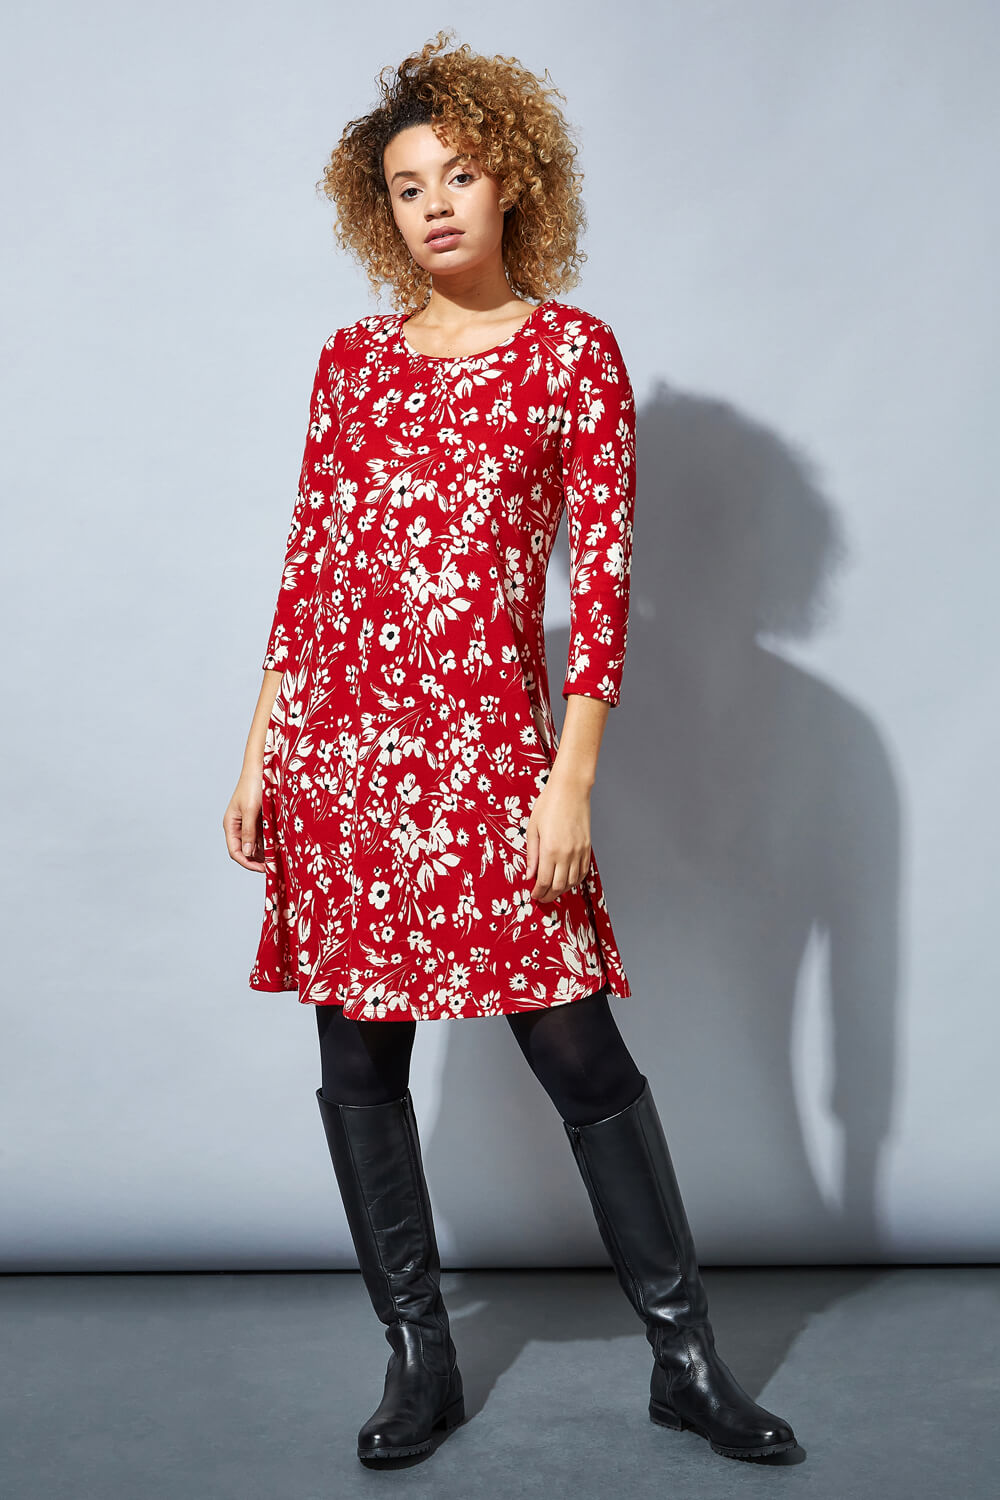 Red Floral Print Swing Dress, Image 2 of 4